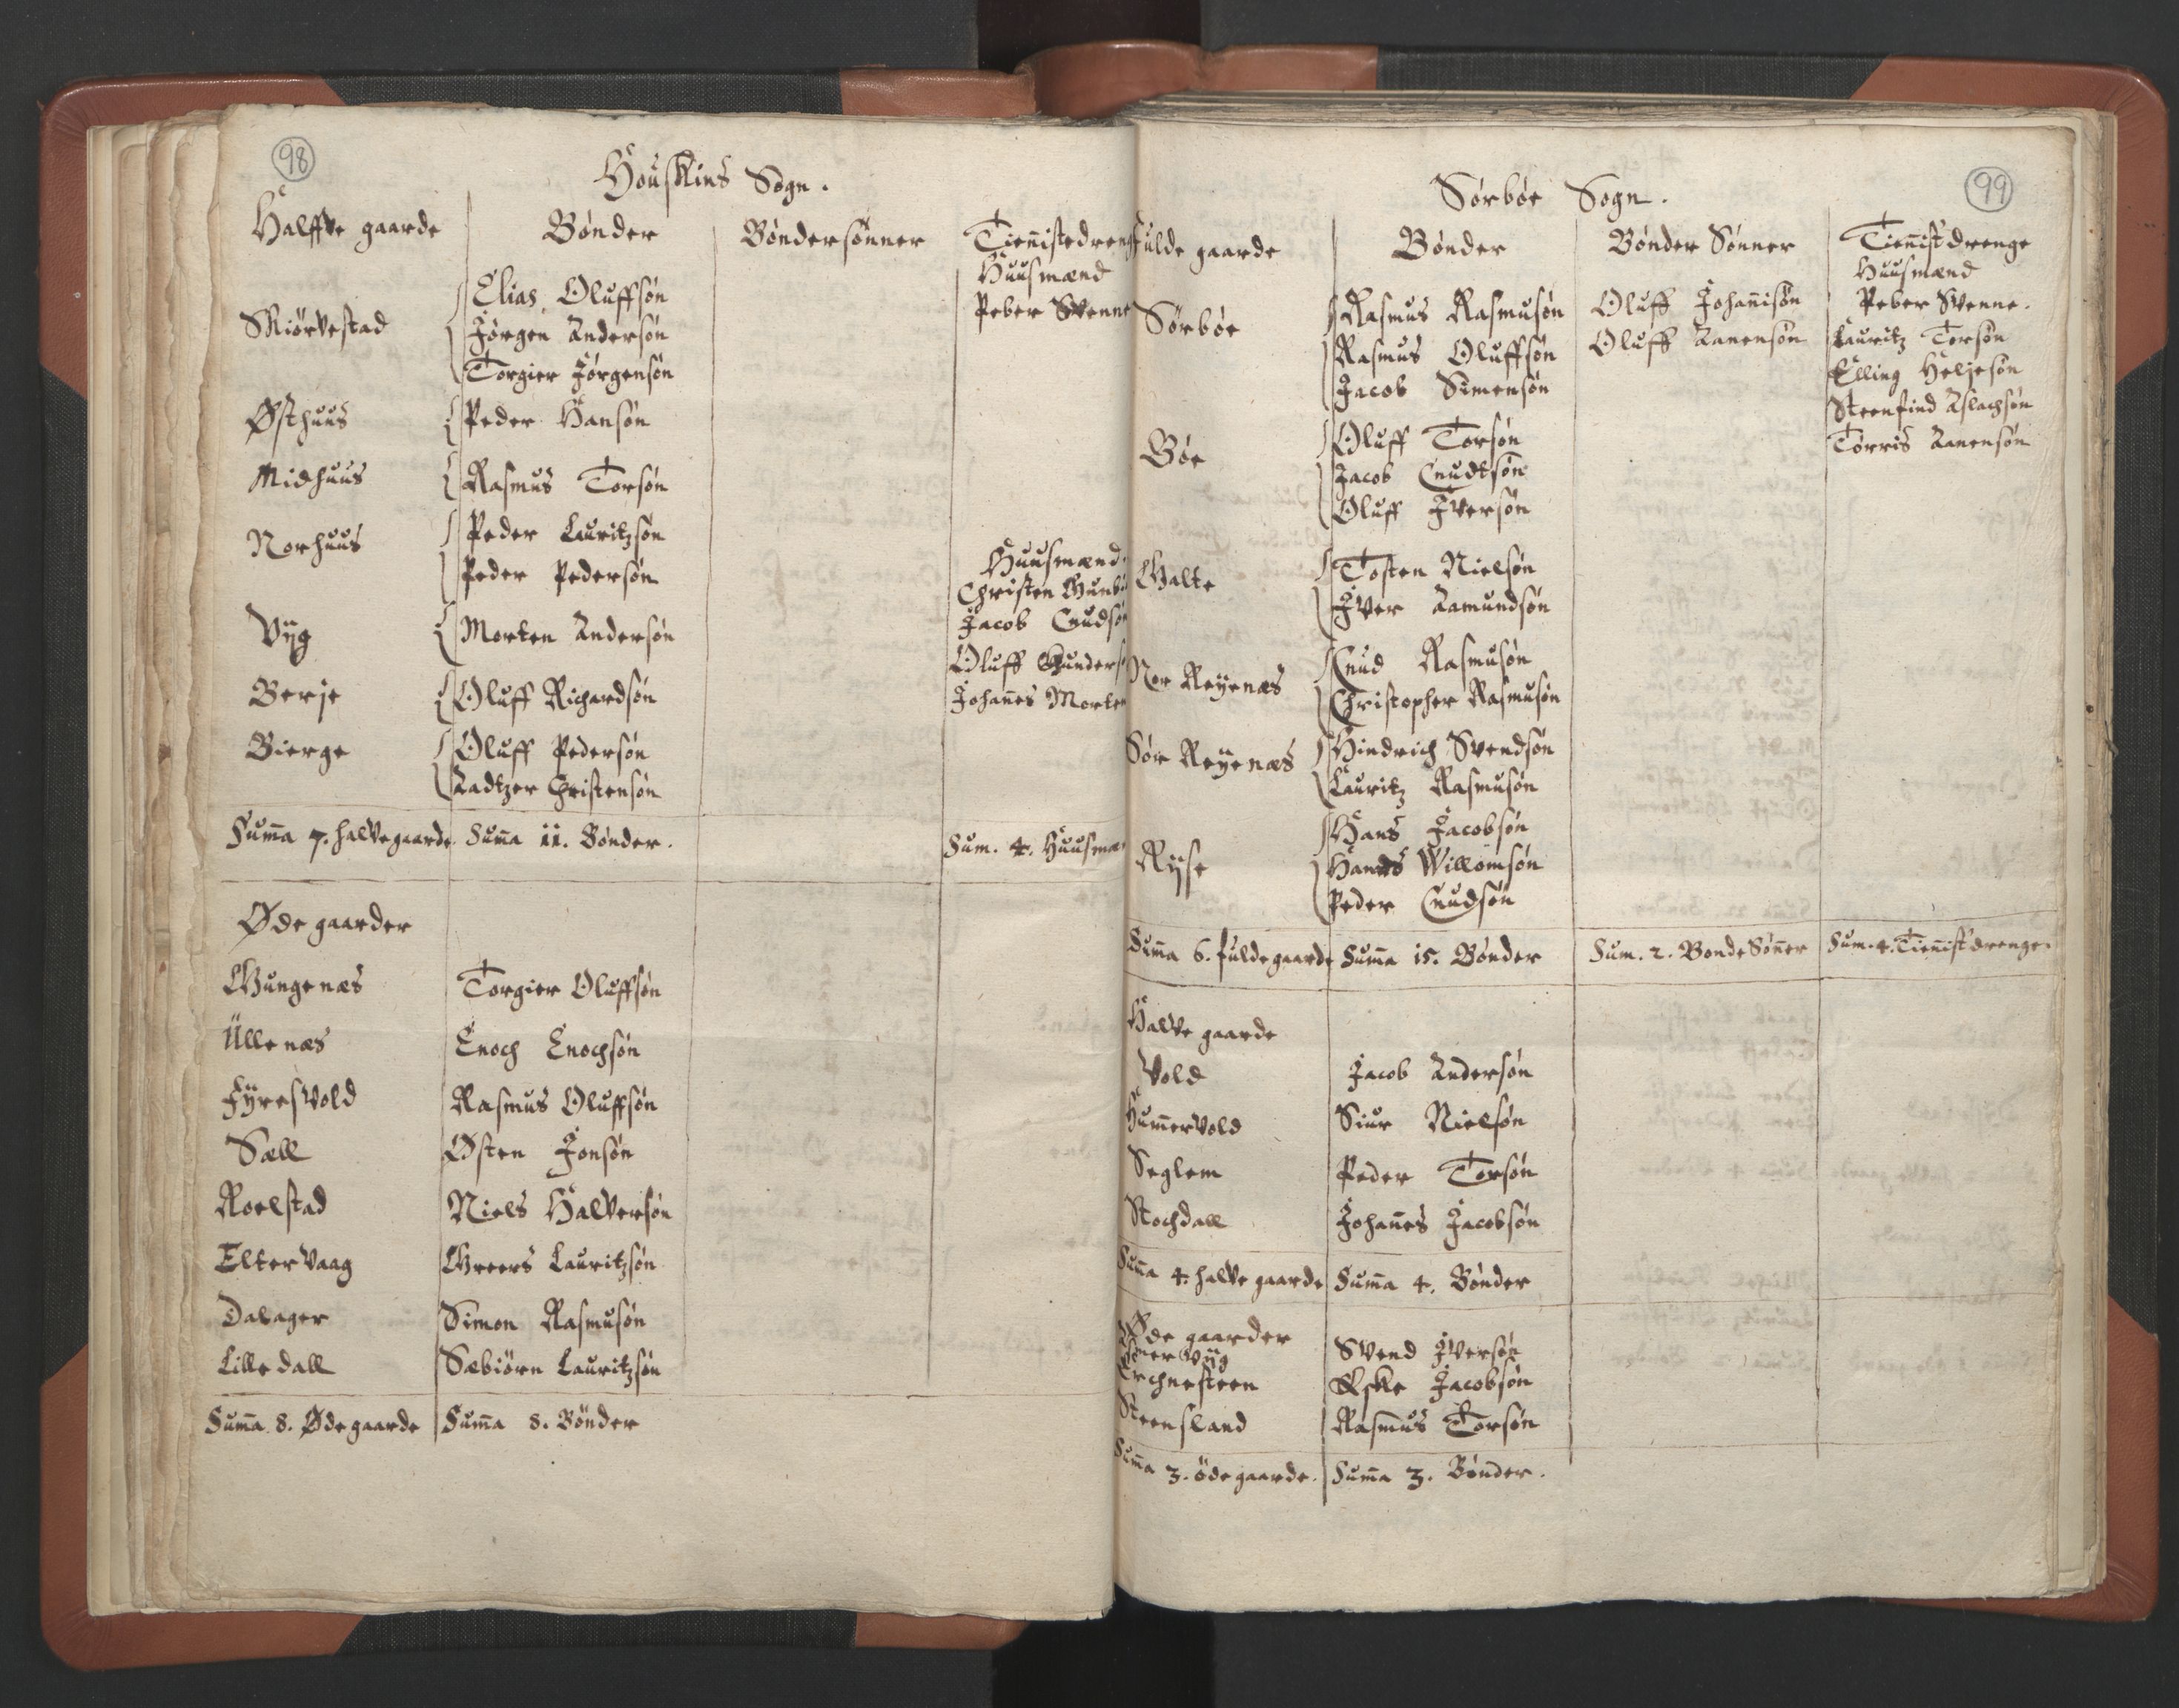 RA, Vicar's Census 1664-1666, no. 18: Stavanger deanery and Karmsund deanery, 1664-1666, p. 98-99